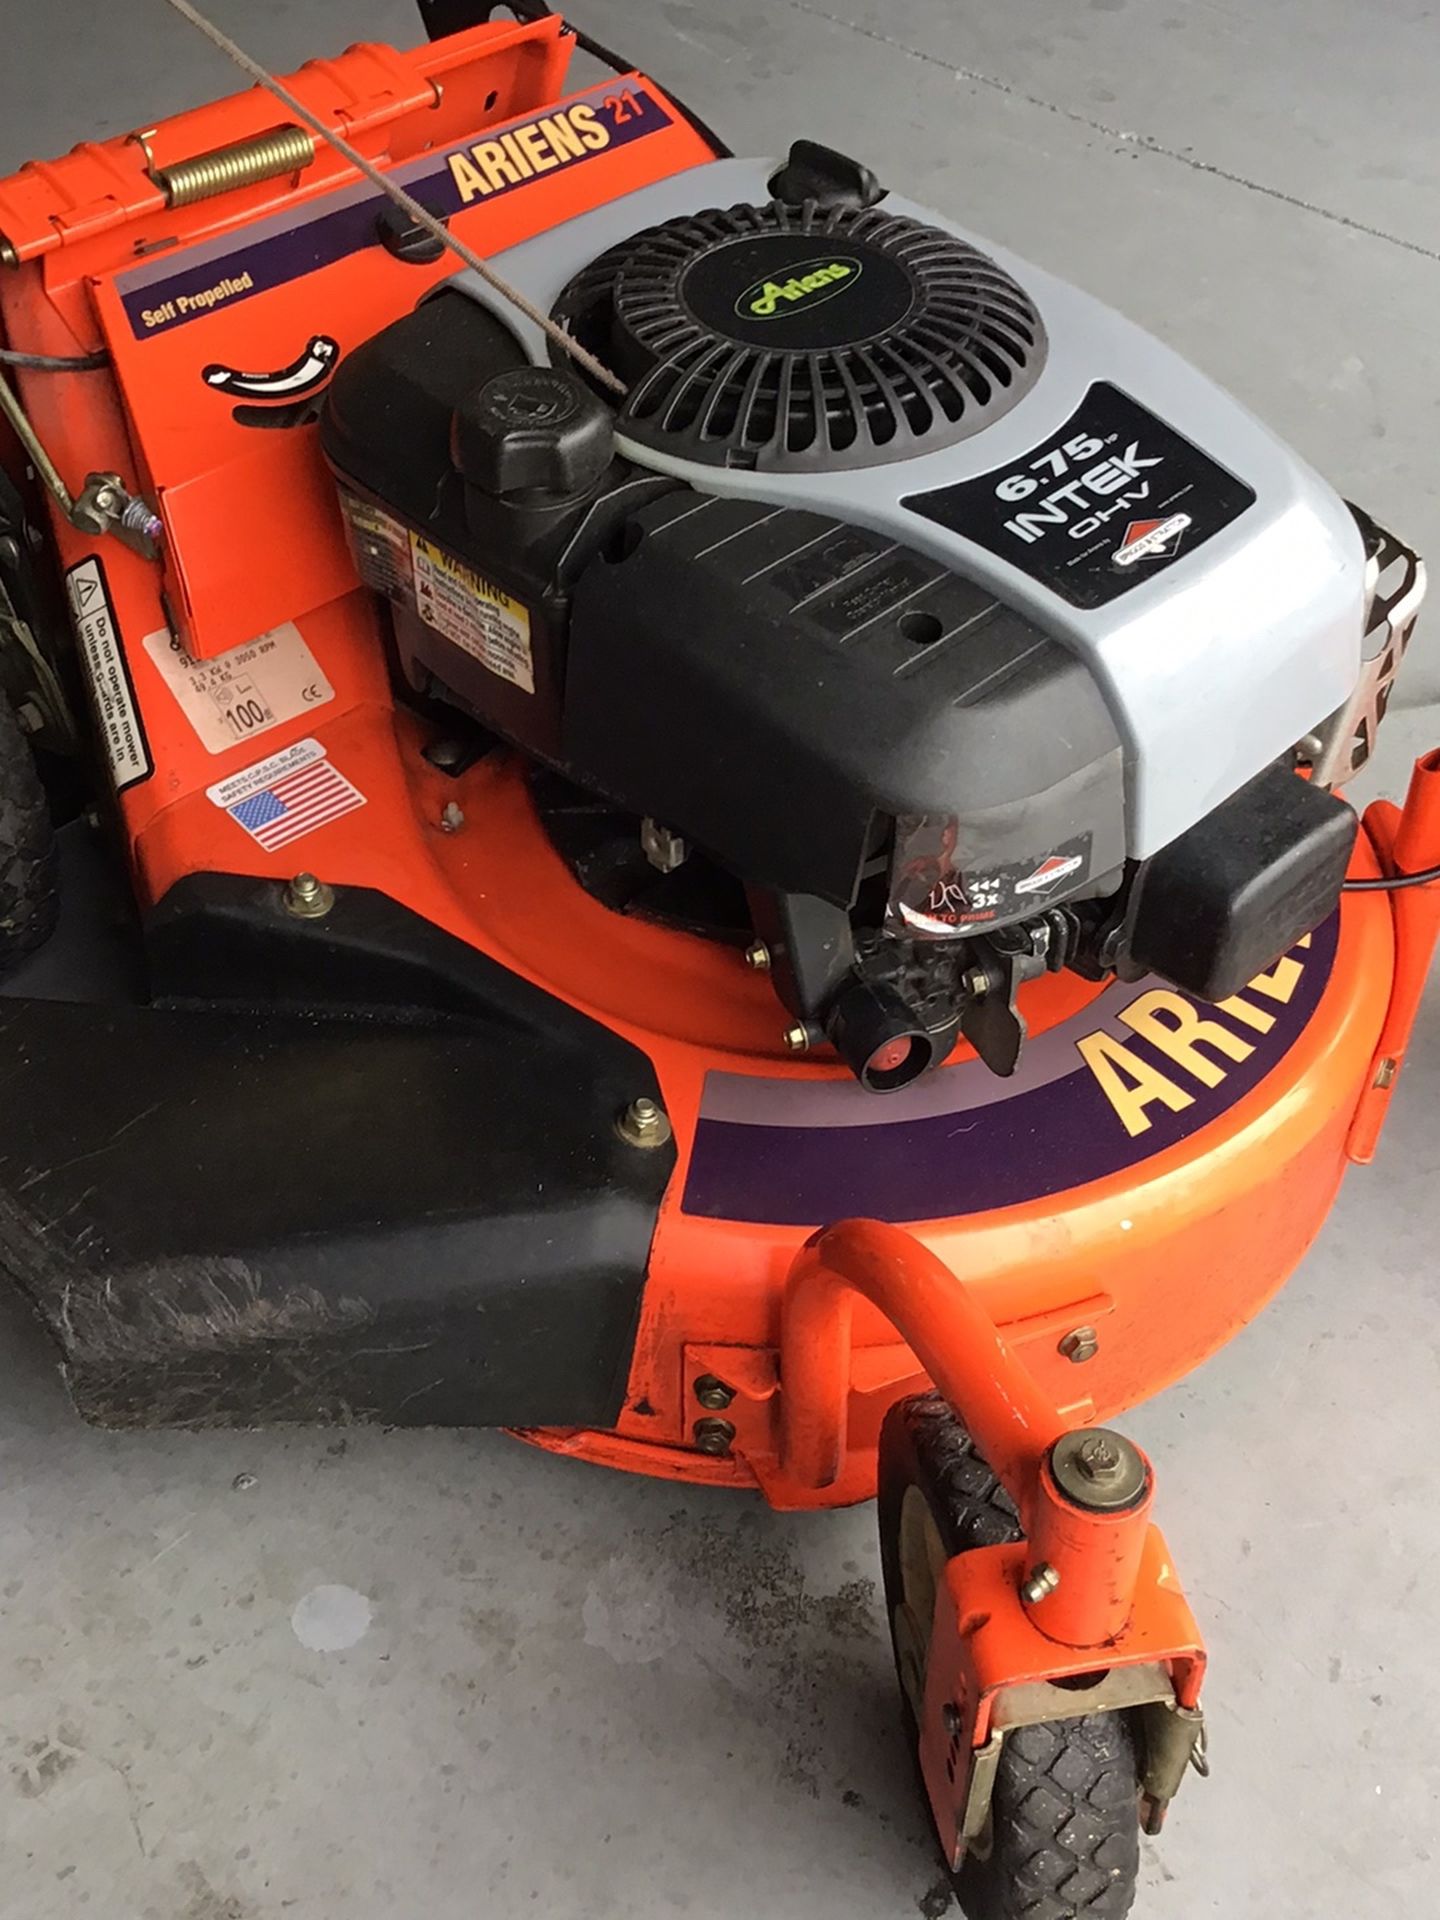 Ariens 21” Commercial Rated Self Propelled